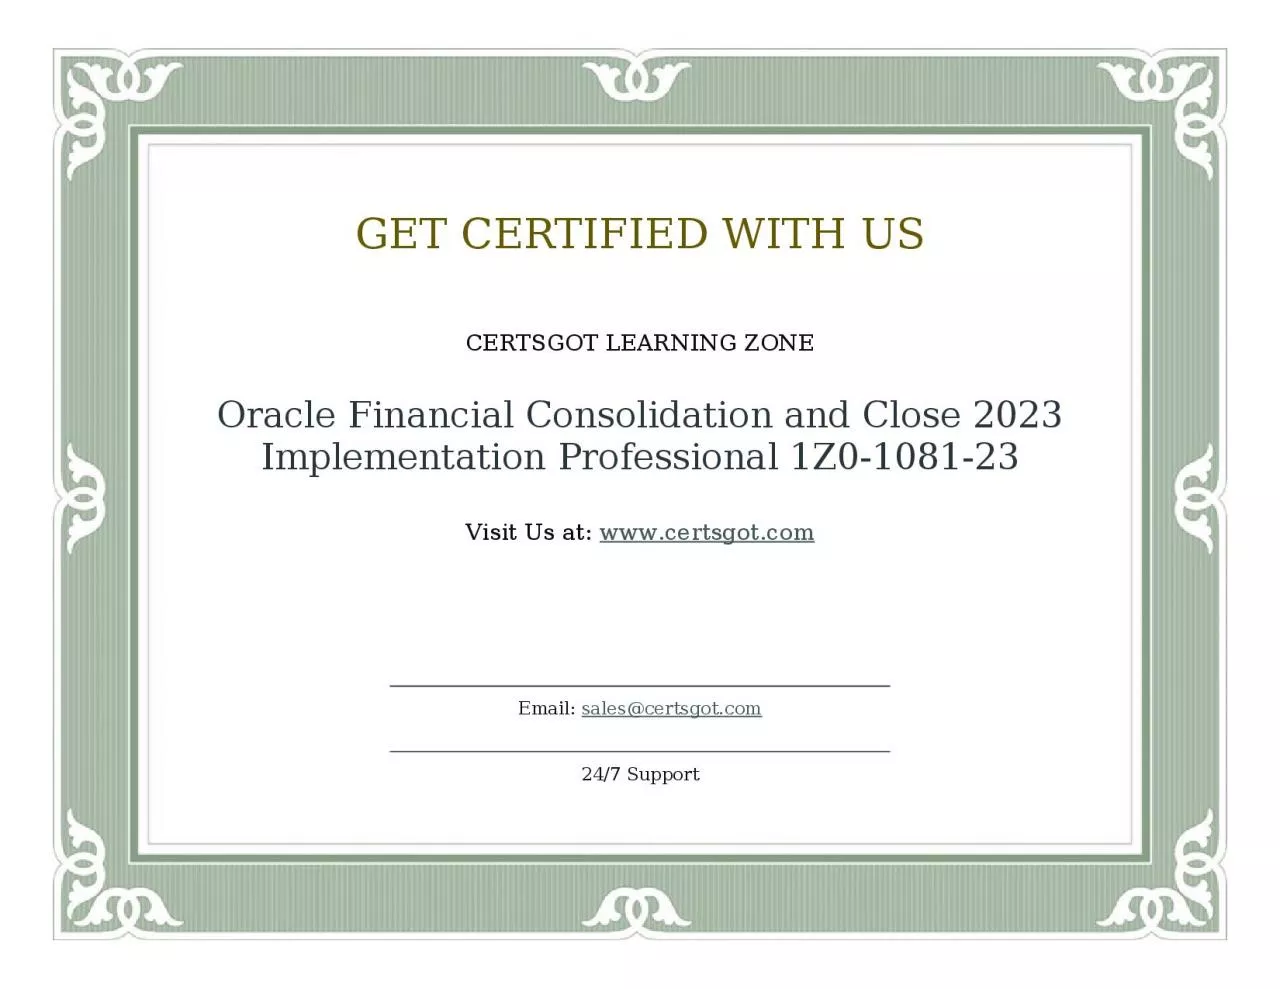 Oracle Financial Consolidation and Close 2023 Implementation Professional 1Z0-1081-23